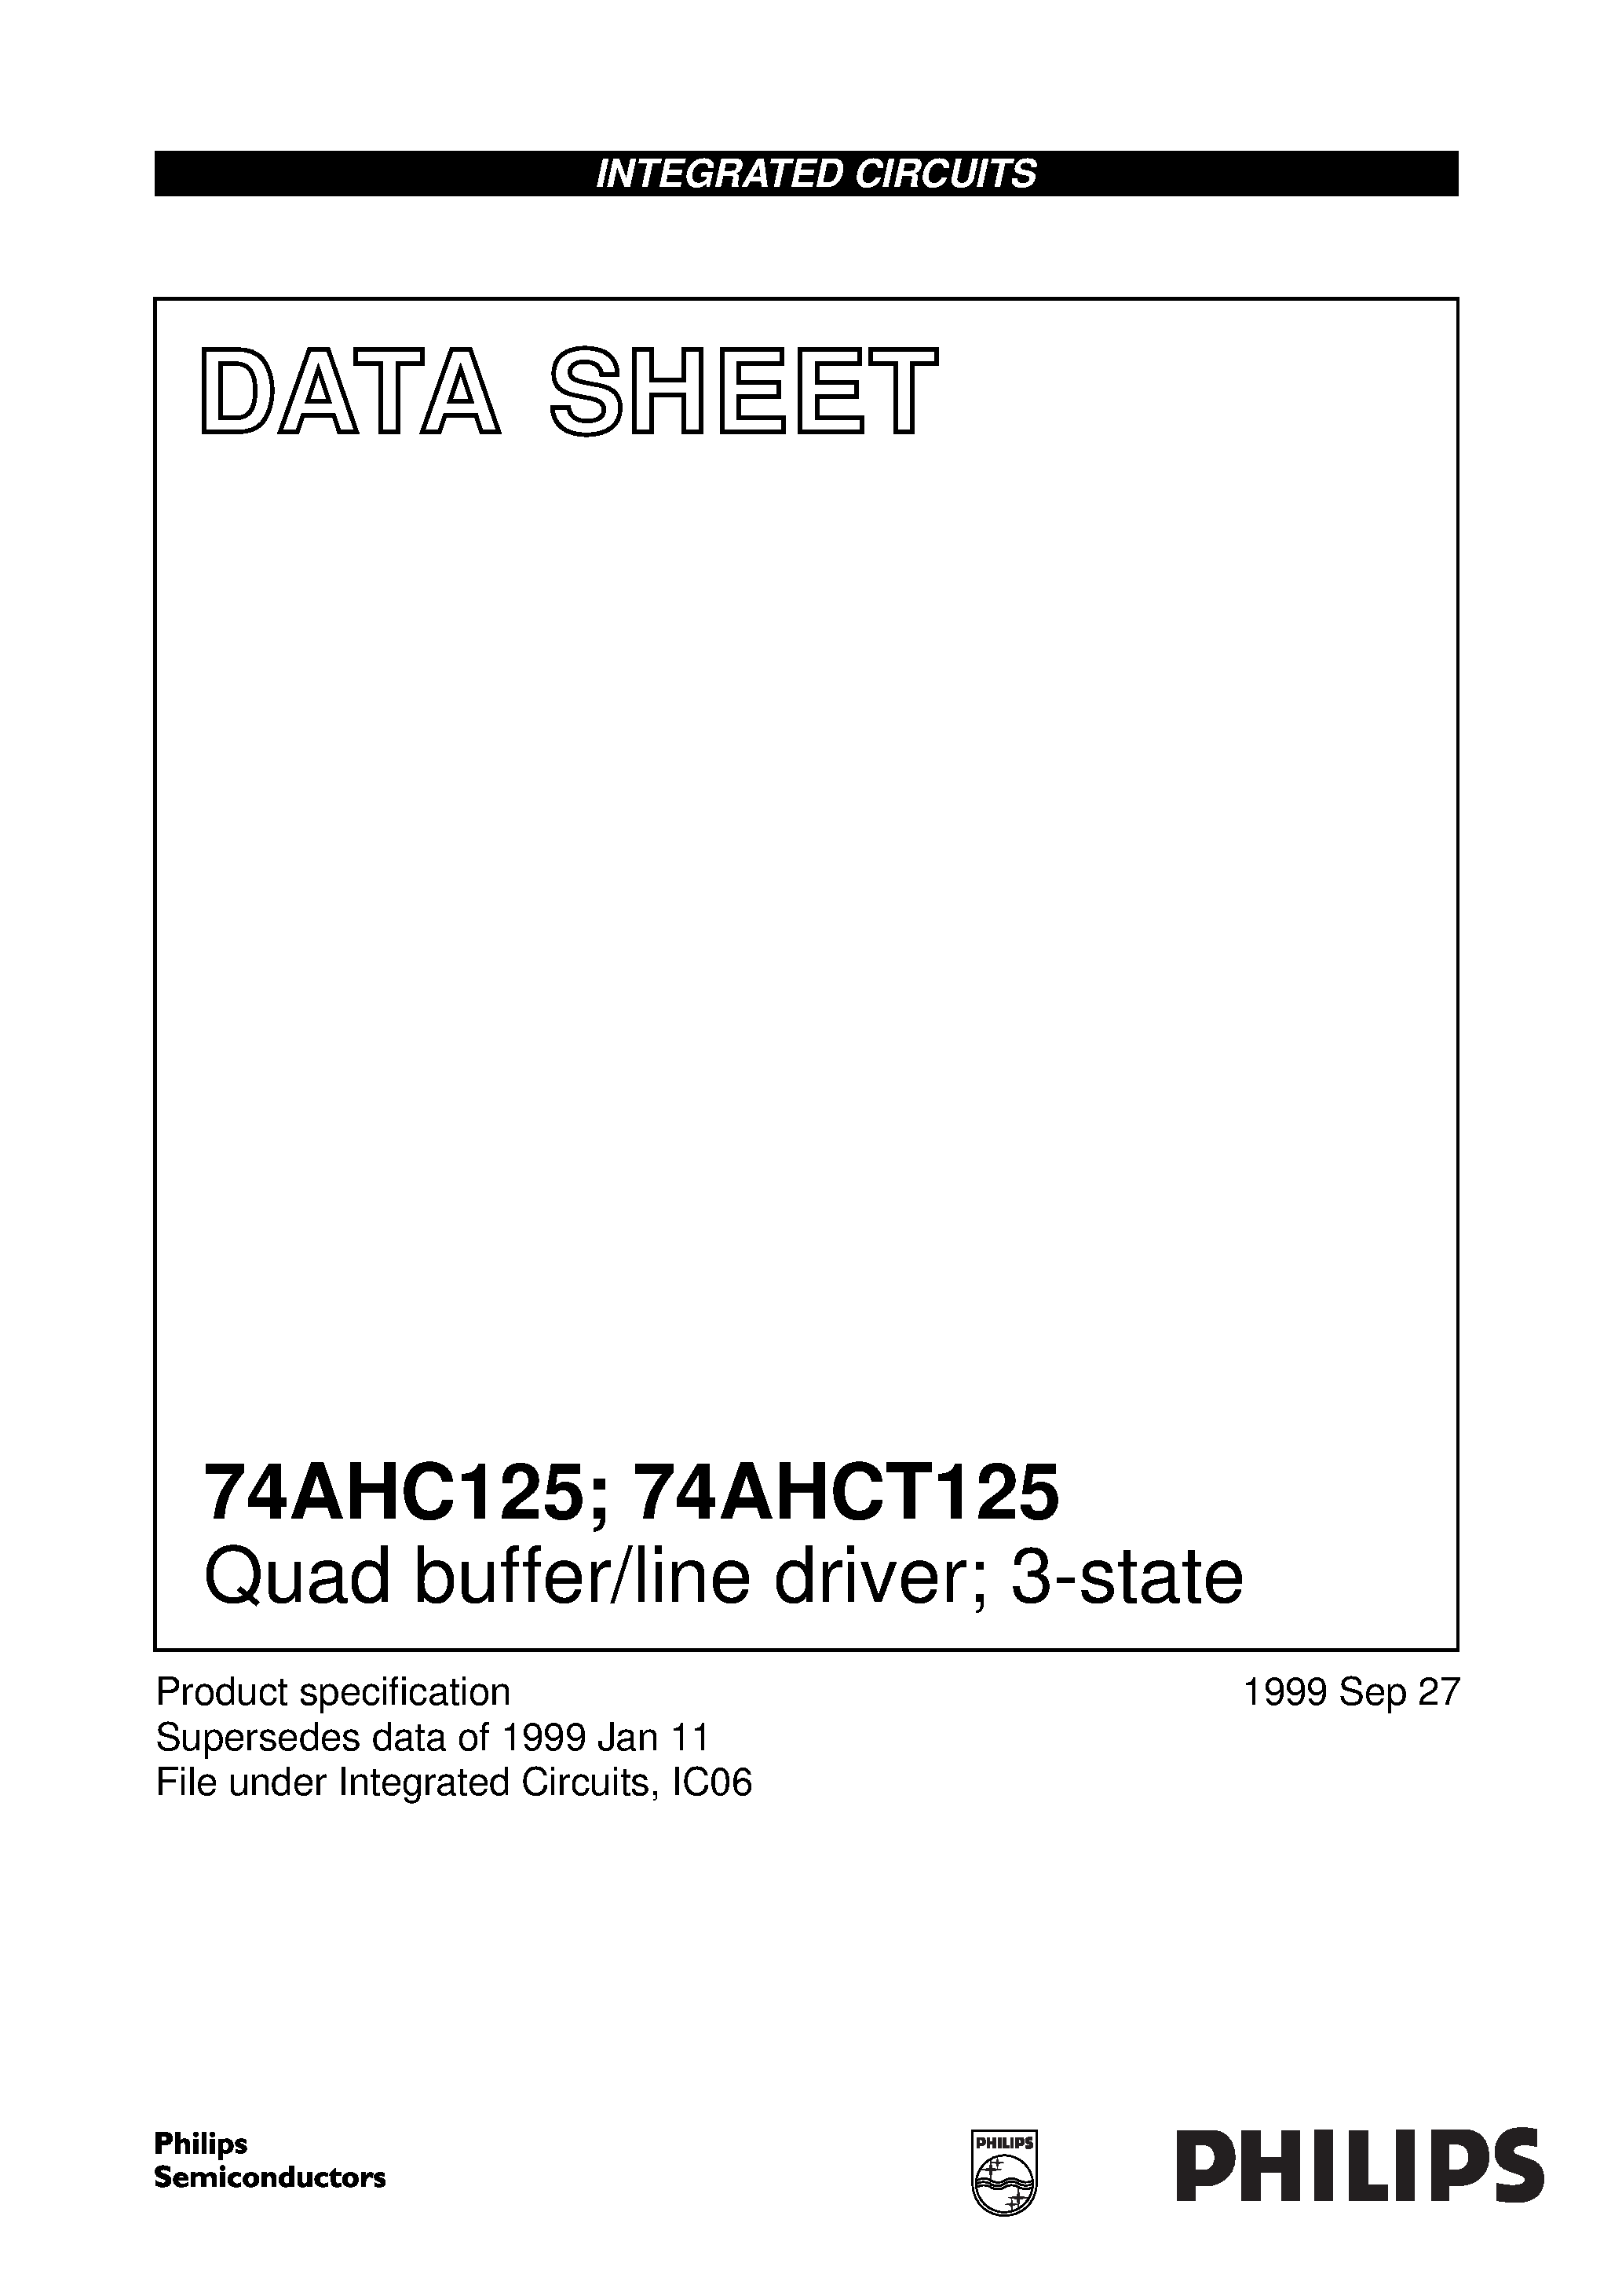 Datasheet 74AHC125PW - Quad buffer/line driver; 3-state page 1